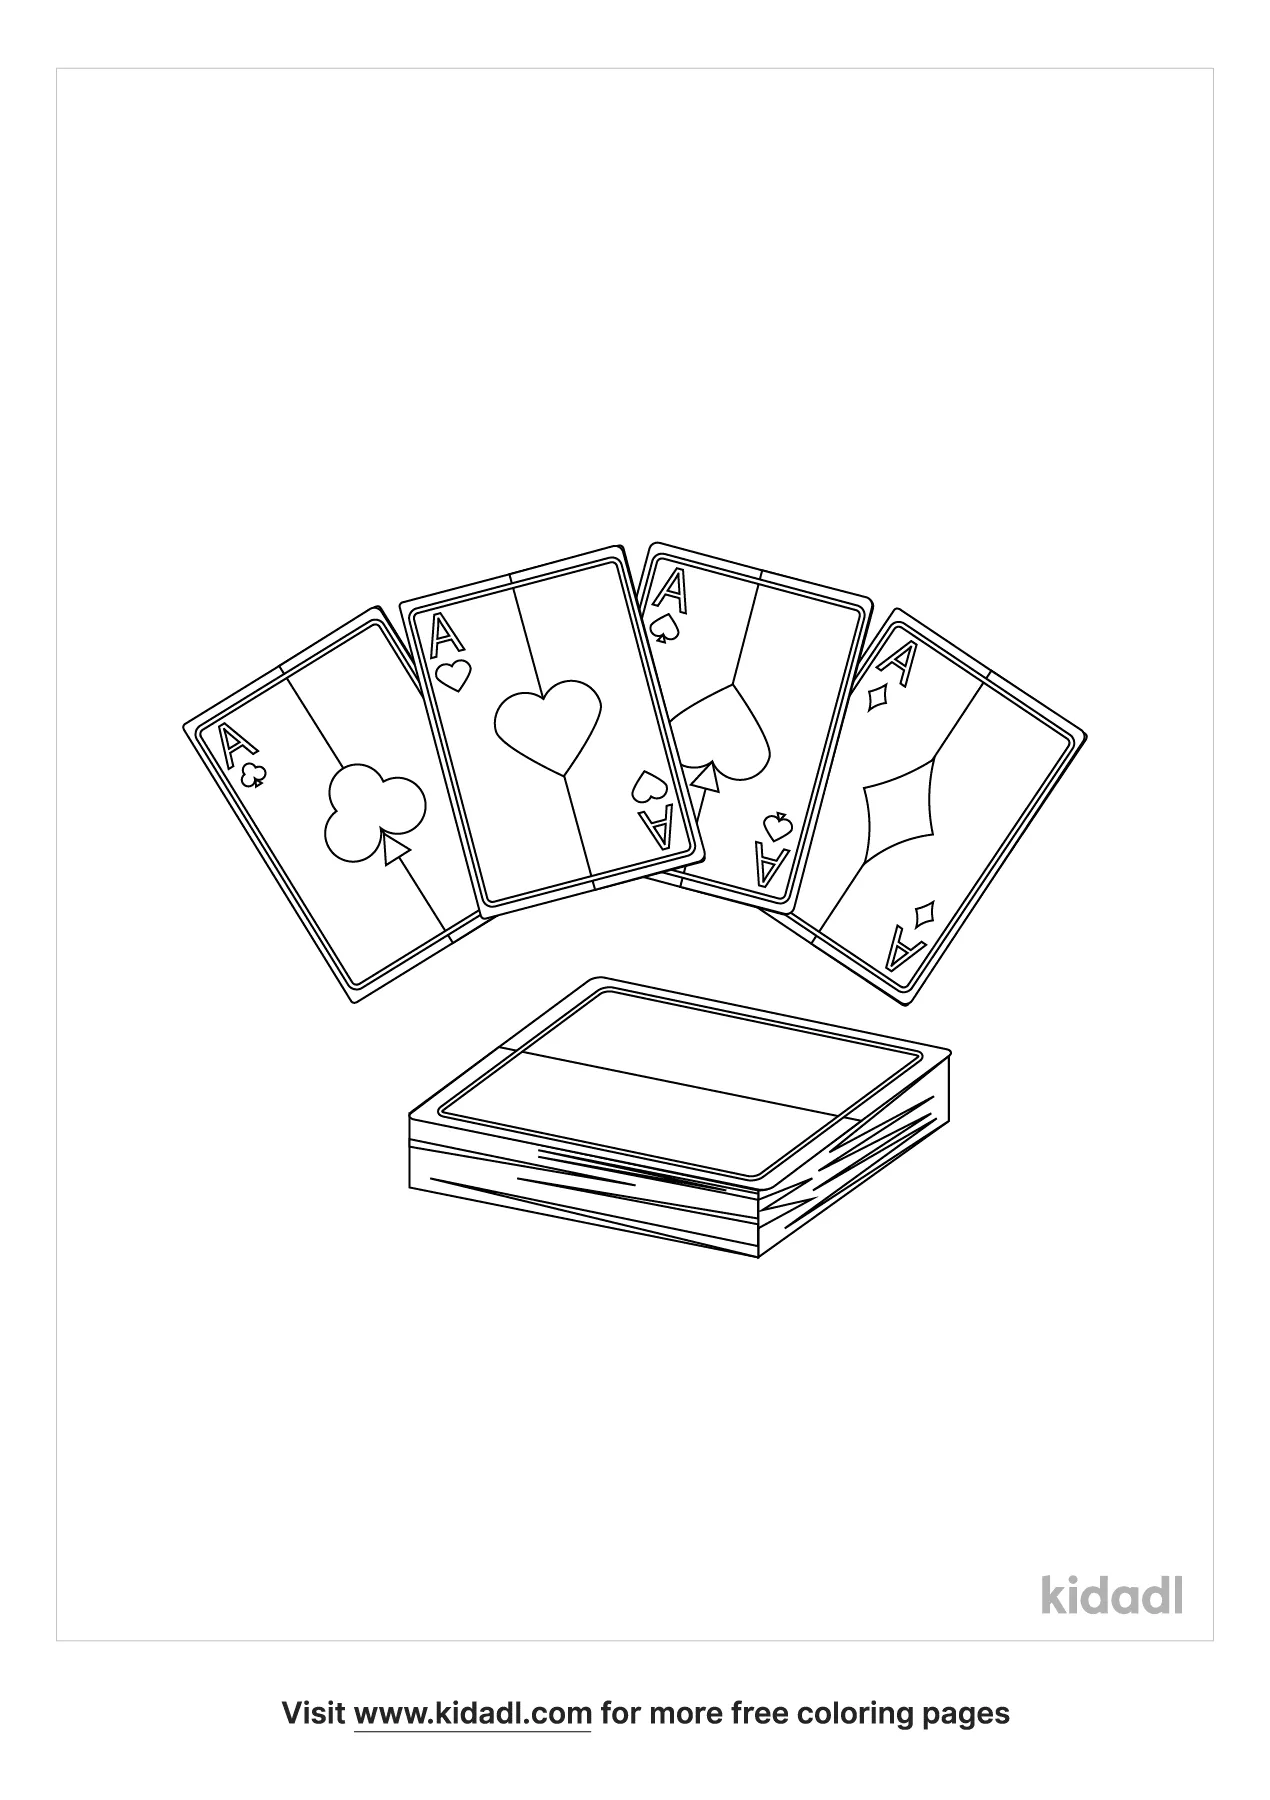 Playing Cards Coloring Page | Free Sports Coloring Page | Kidadl